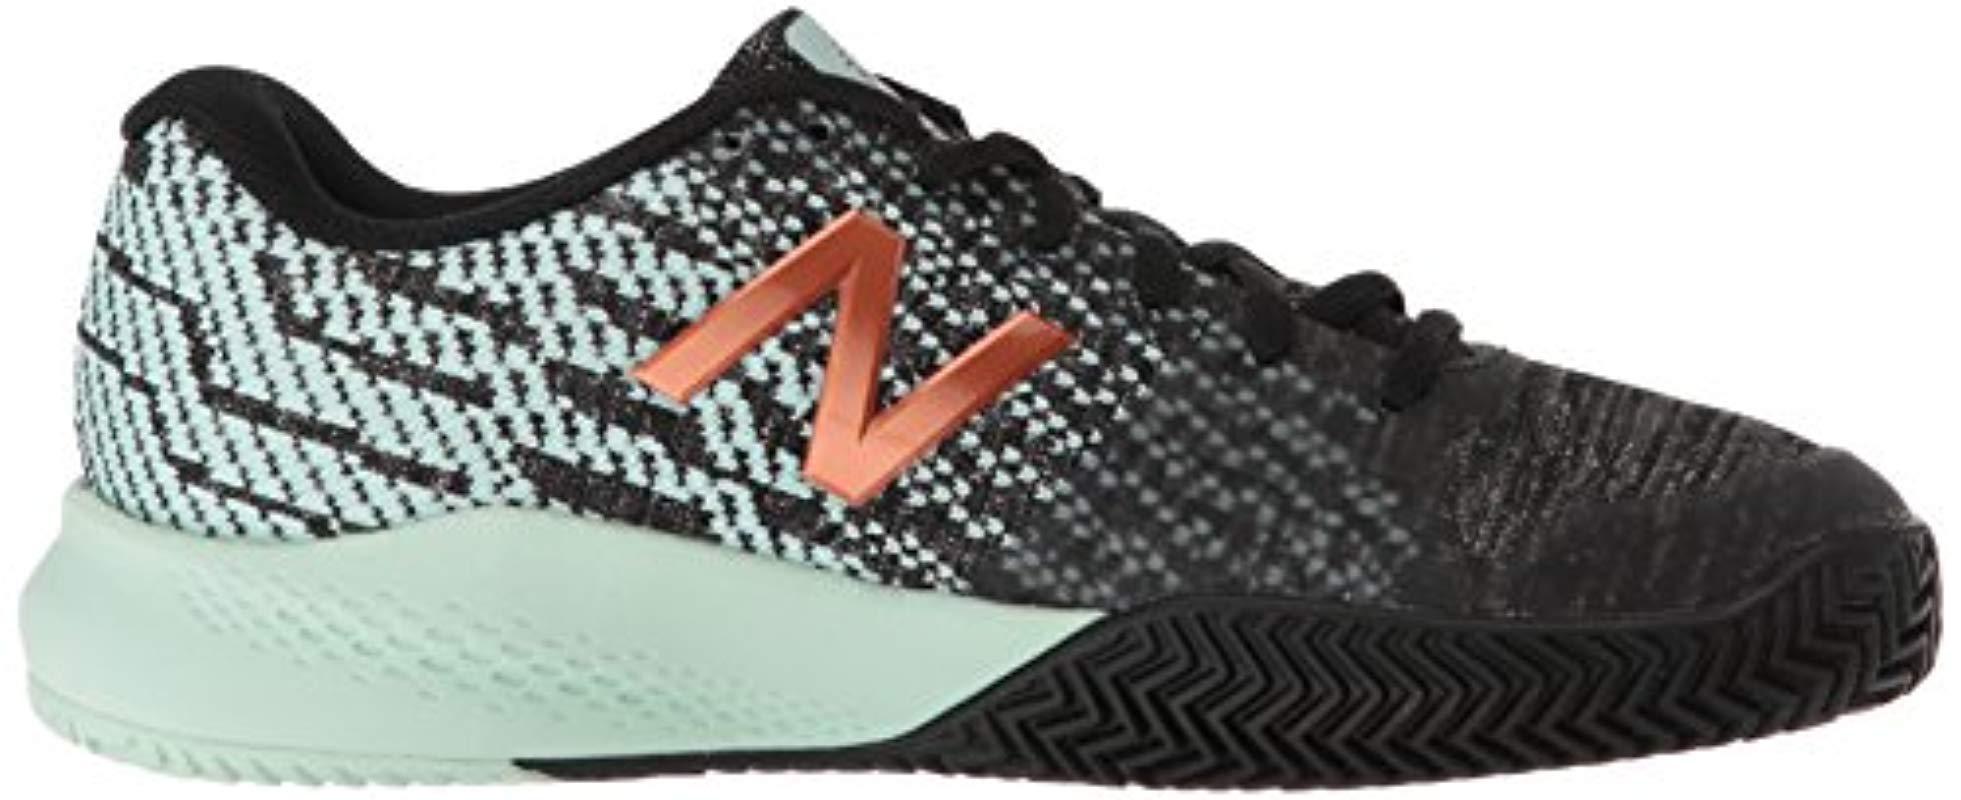 new balance clay court tennis shoes